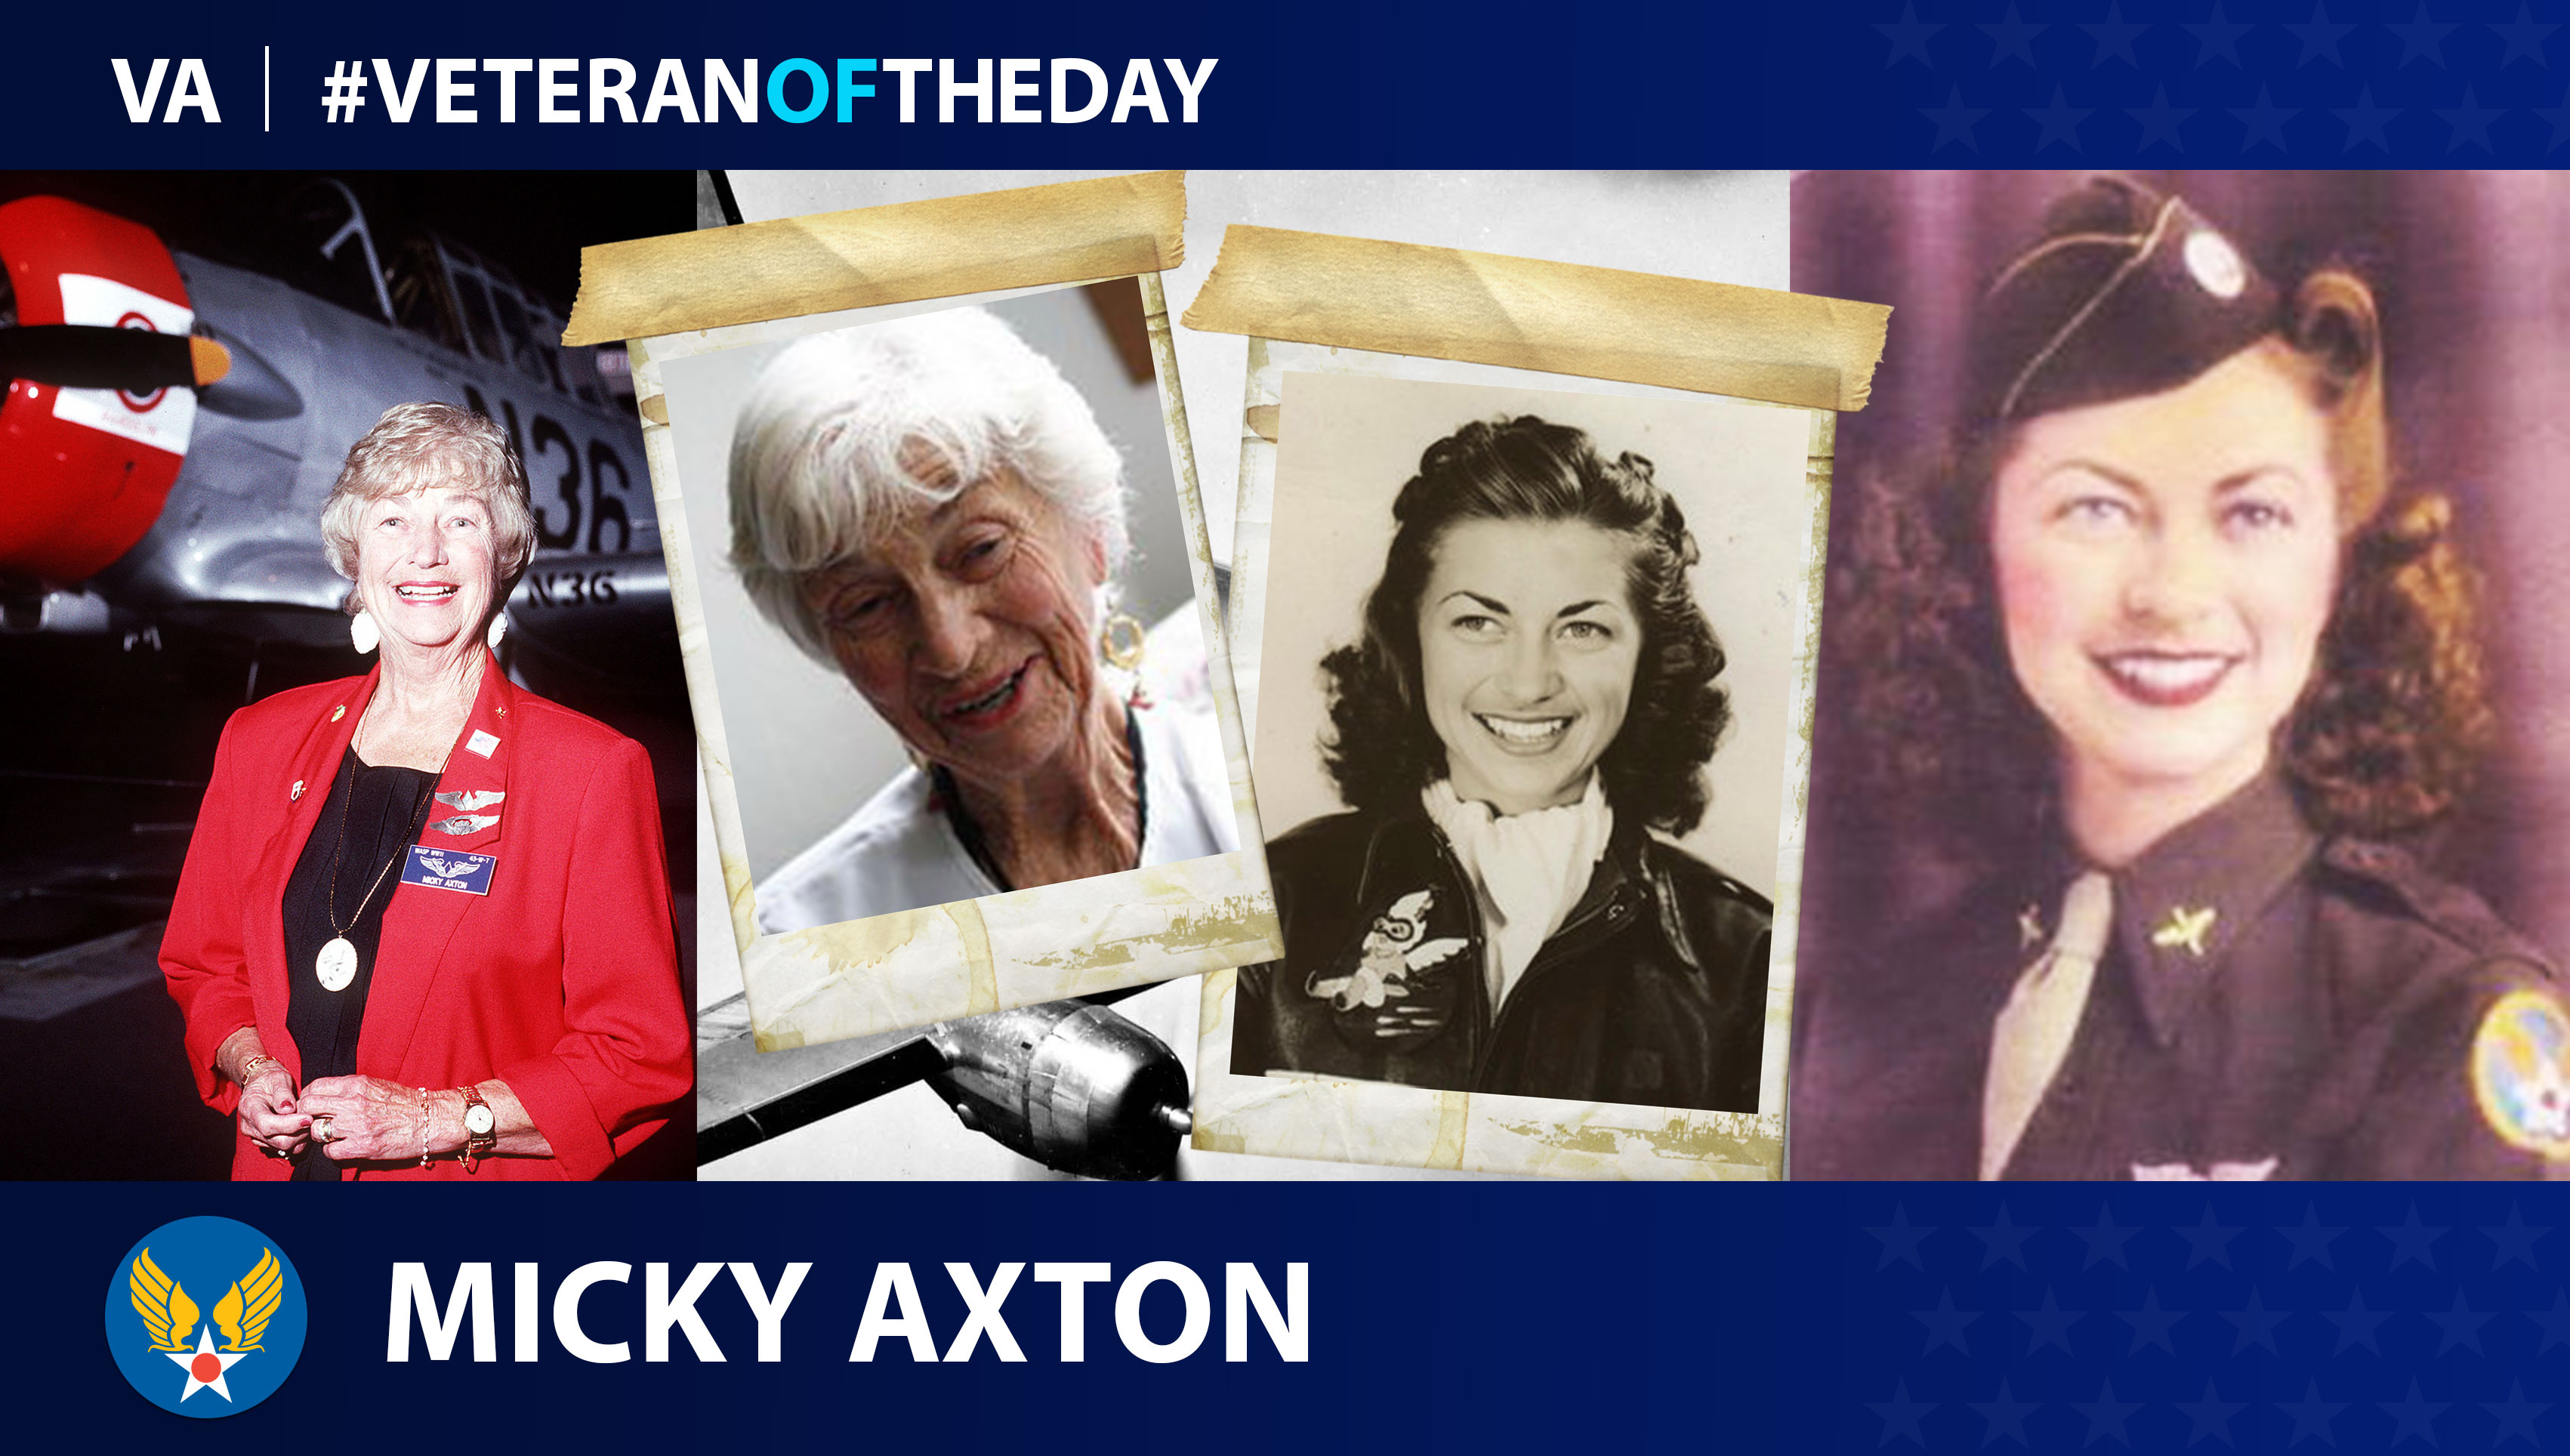 Micky Axton is today's Veteran of the Day.